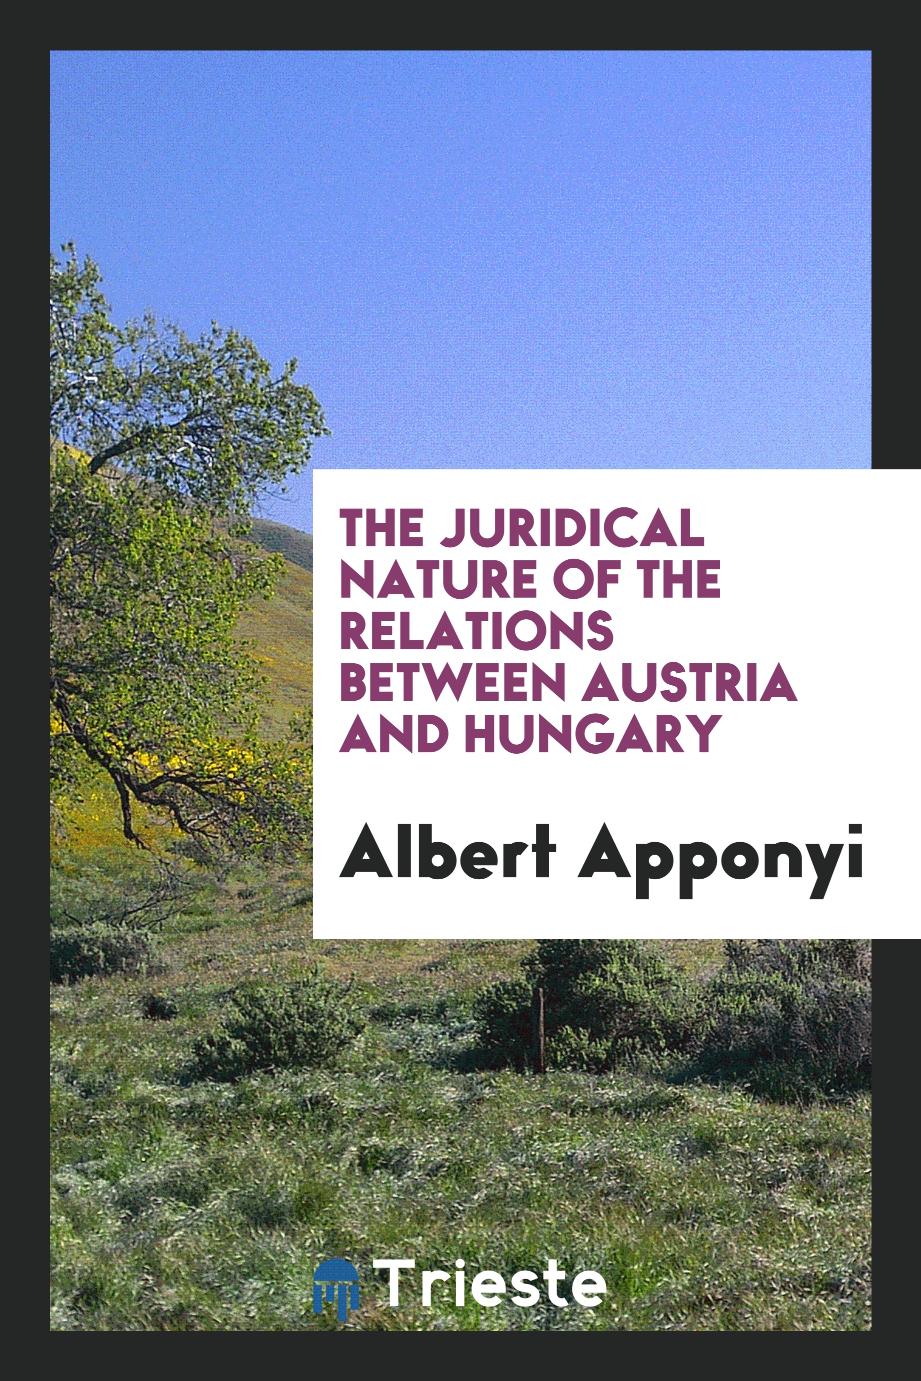 The Juridical Nature of the Relations Between Austria and Hungary